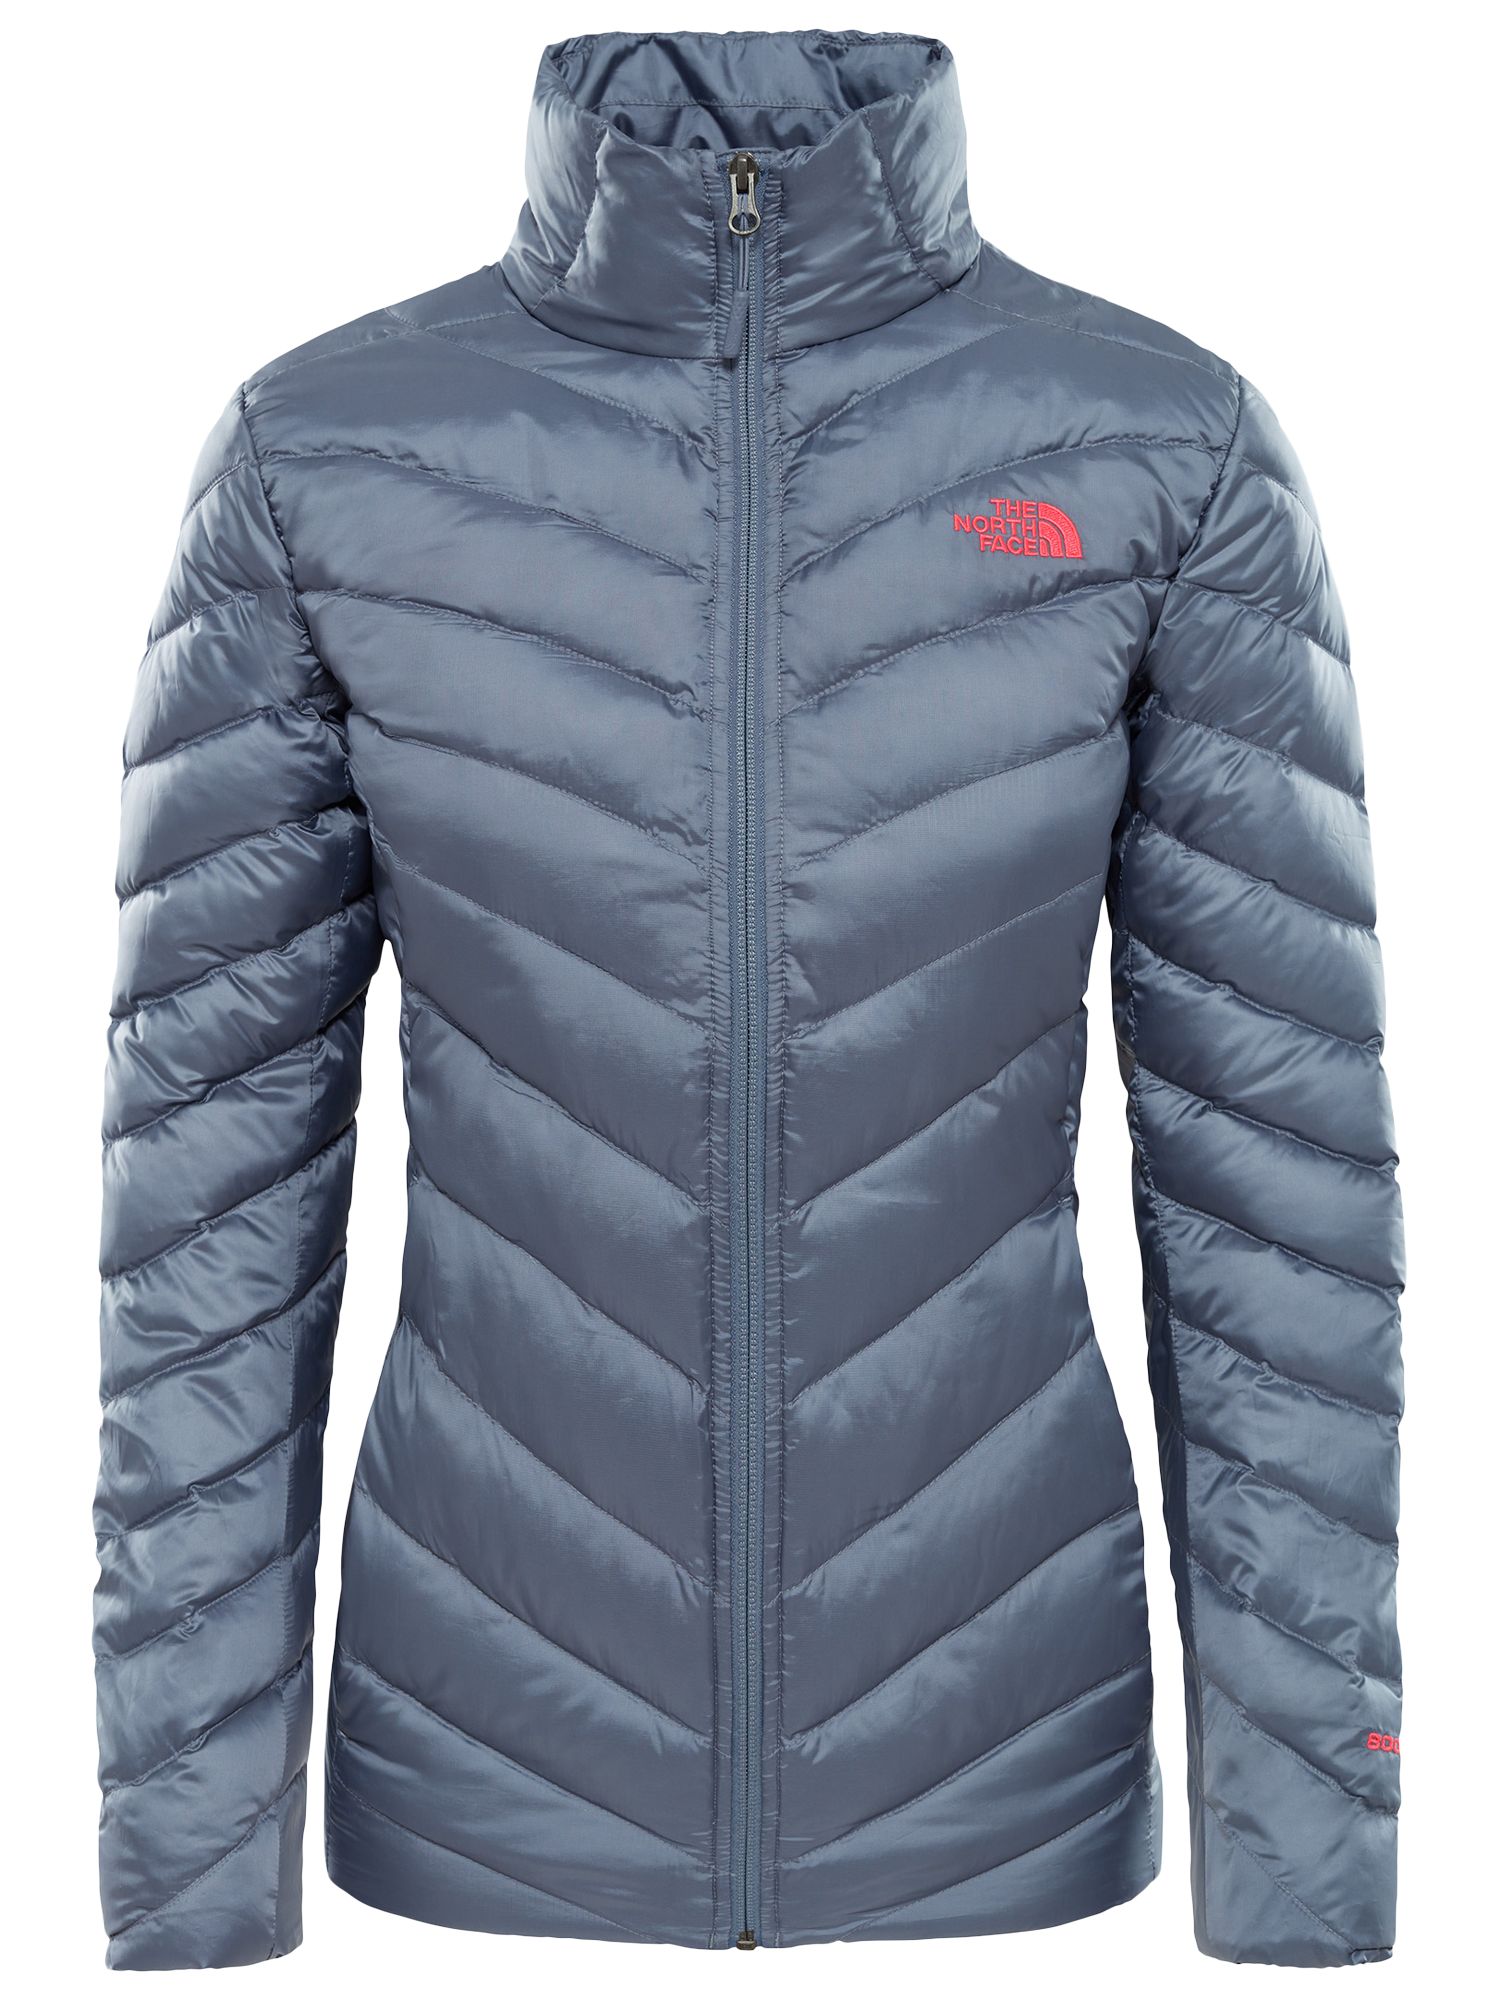 The North Face Trevail Women's Jacket, Grisaille Grey at John Lewis & Partners